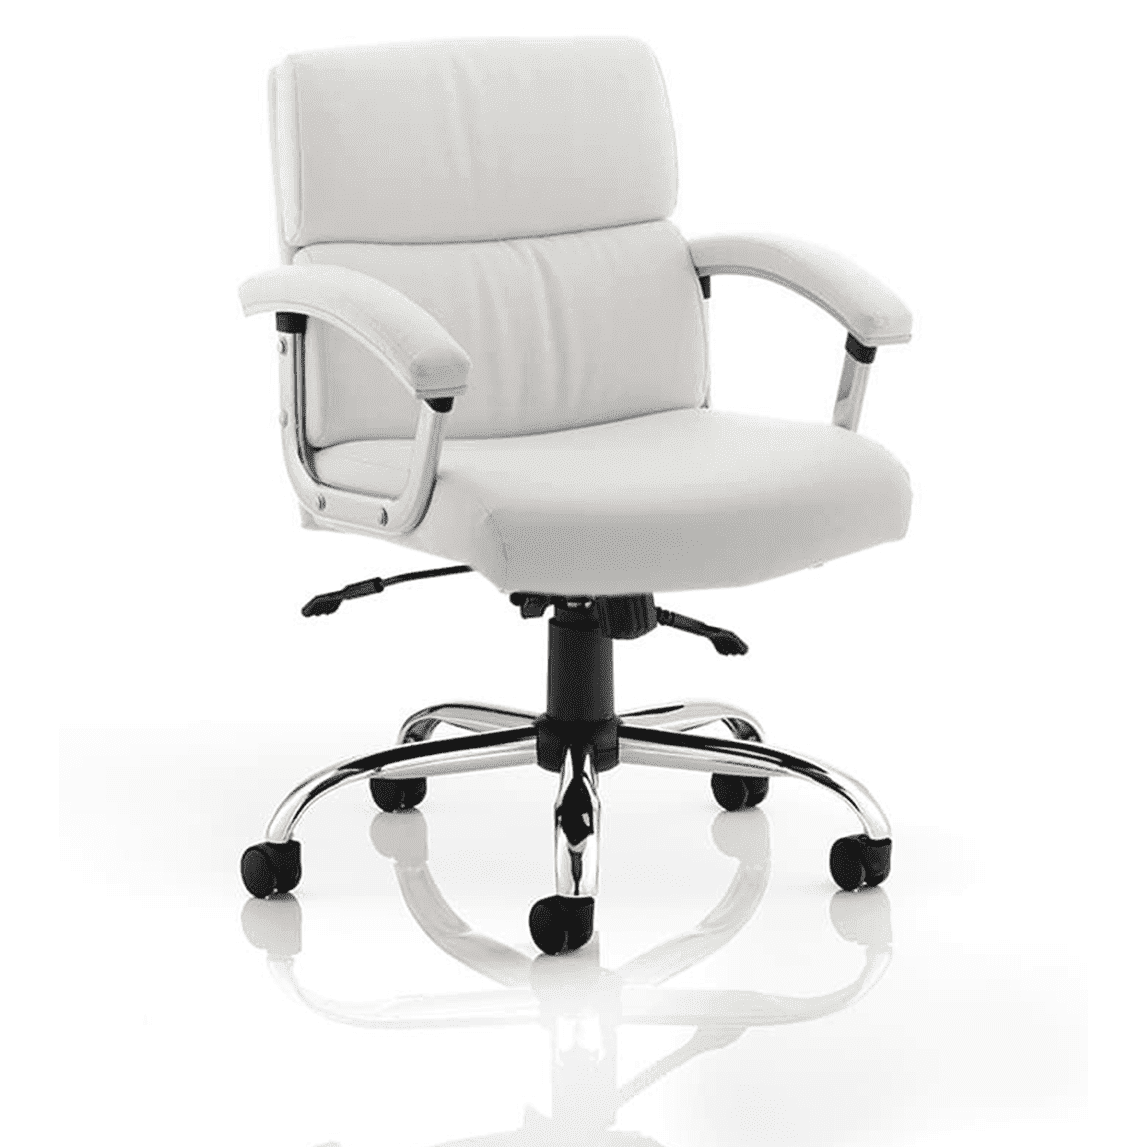 Desire Medium Back Leather Executive Office Chair with Arms - Soft Bonded Leather, Chrome Frame, 125kg Capacity, 8hr Usage, 2yr Mechanism Guarantee